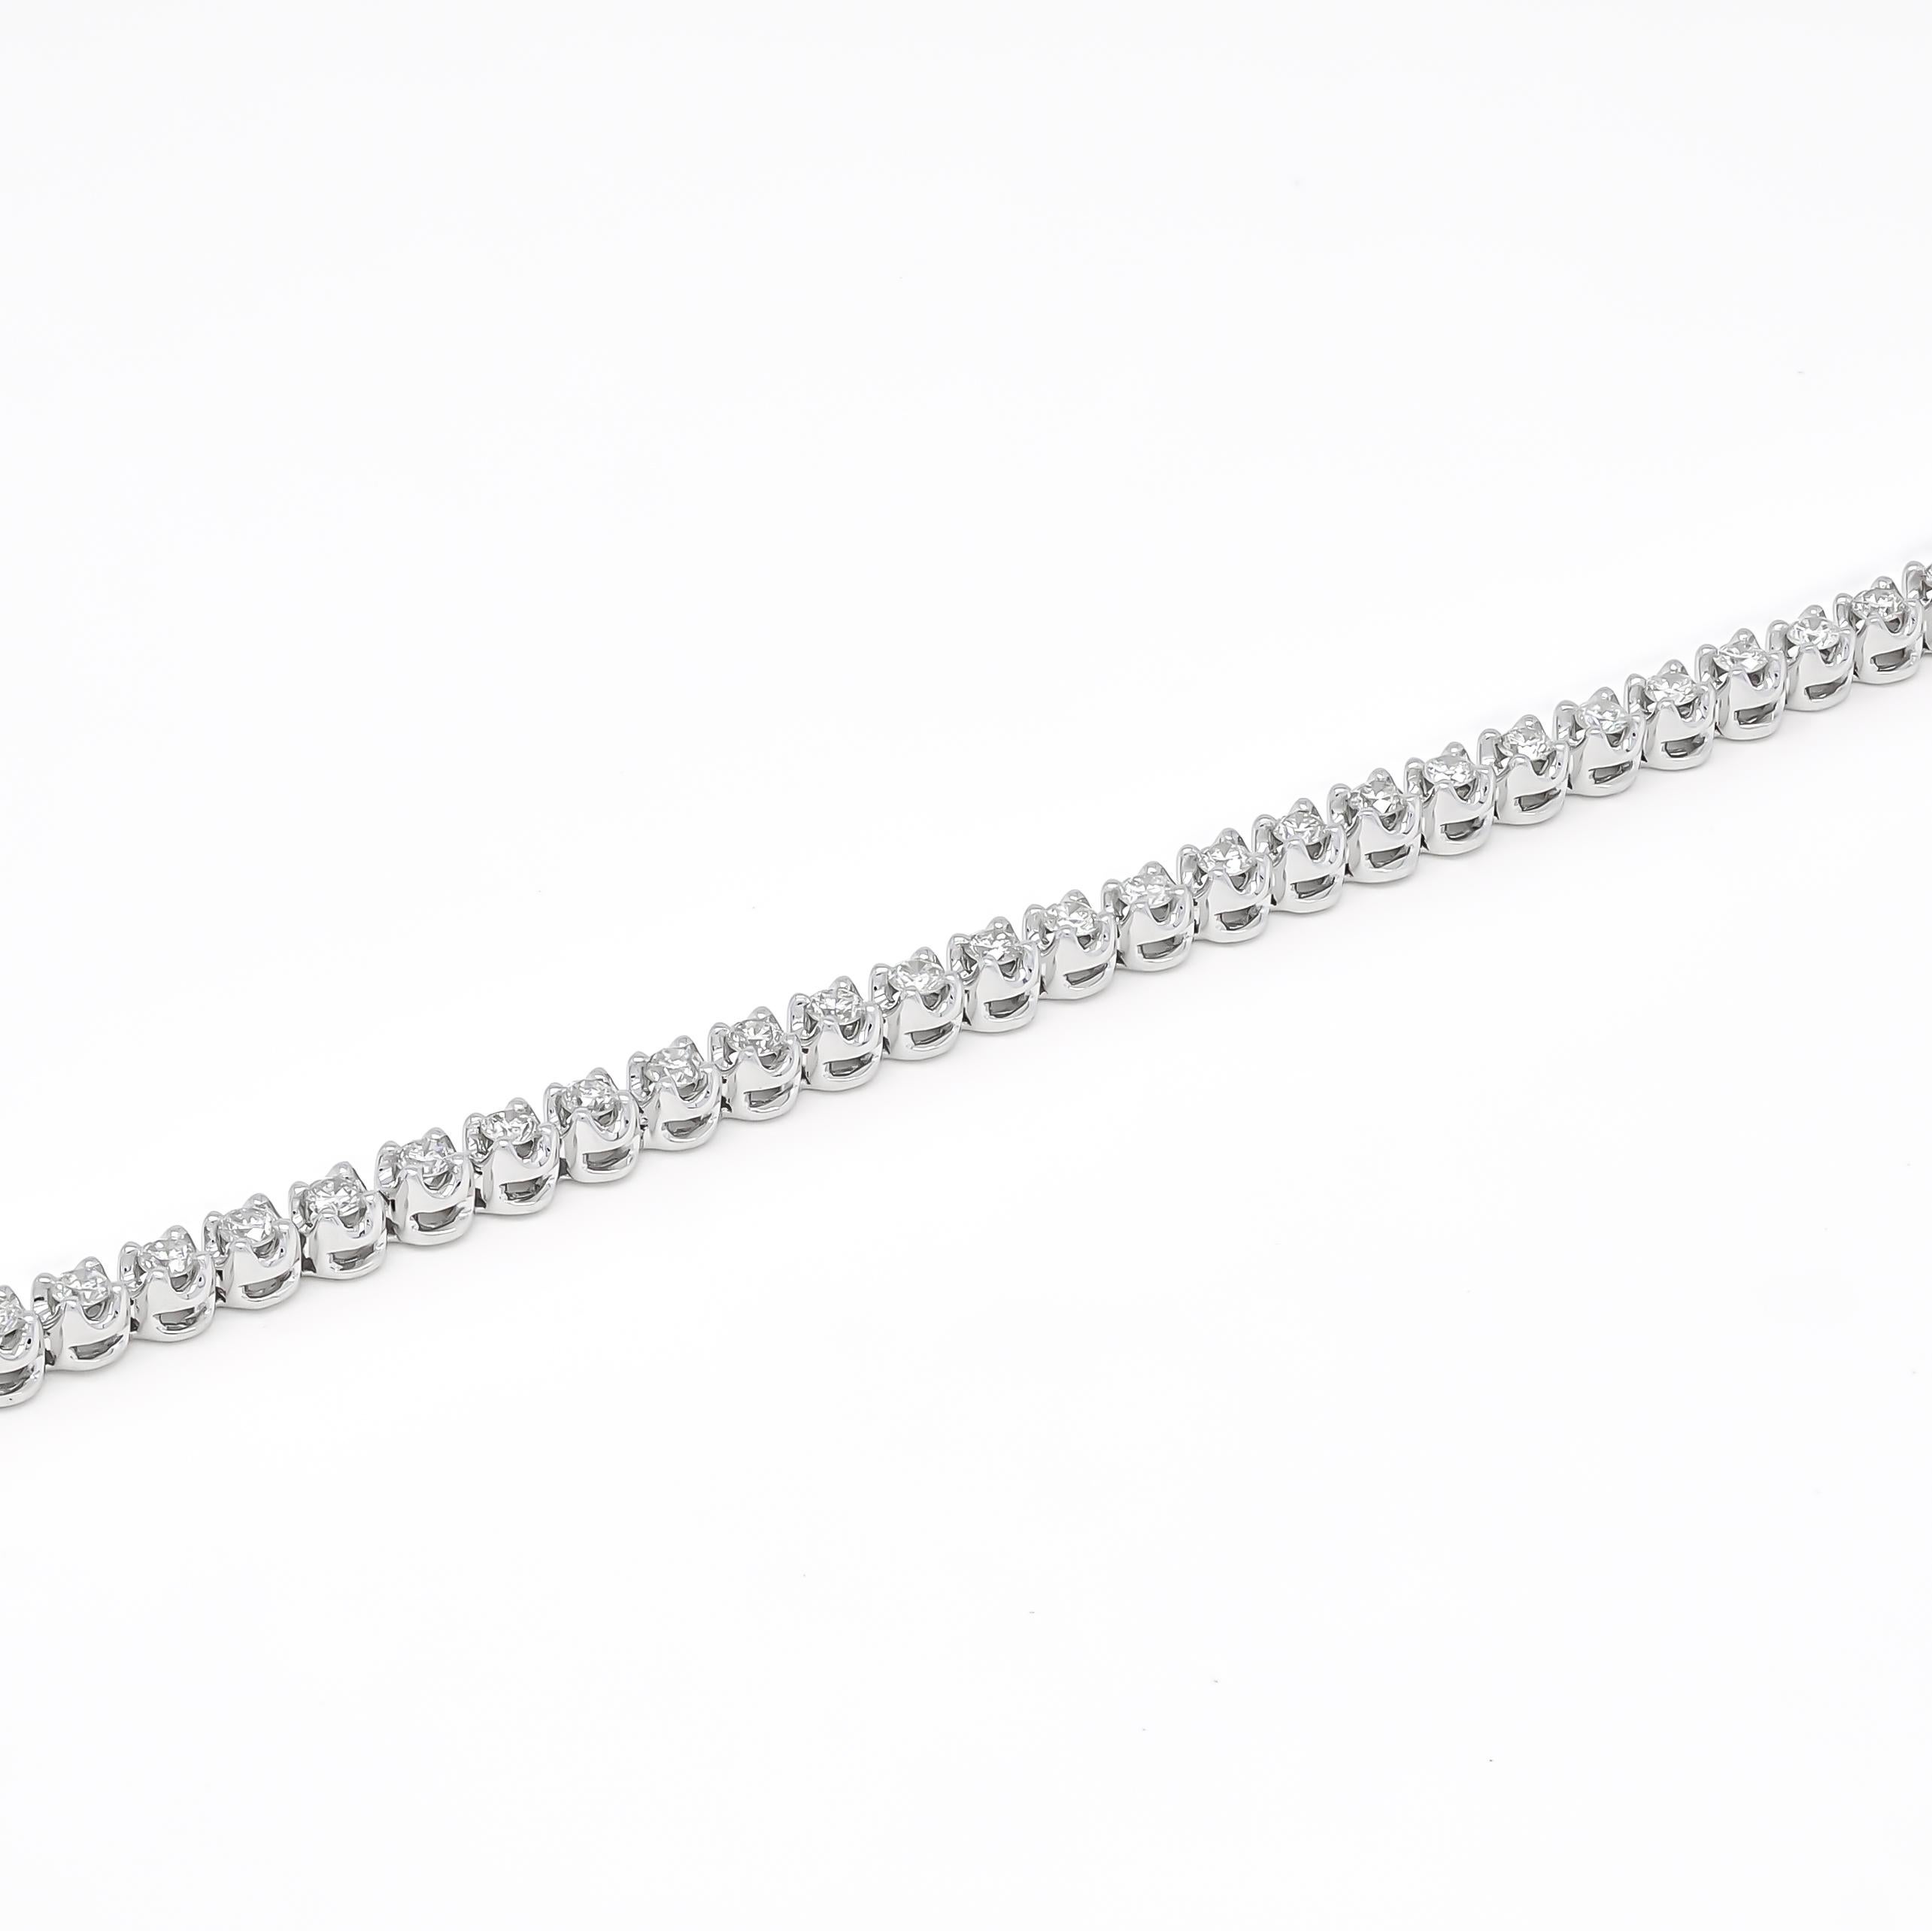 Elevate your wrist with the exquisite beauty of this stunning 1.05CT Tennis Bracelet. Crafted with meticulous attention to detail, this bracelet showcases the perfect balance of elegance and sophistication. The bracelet features a continuous line of